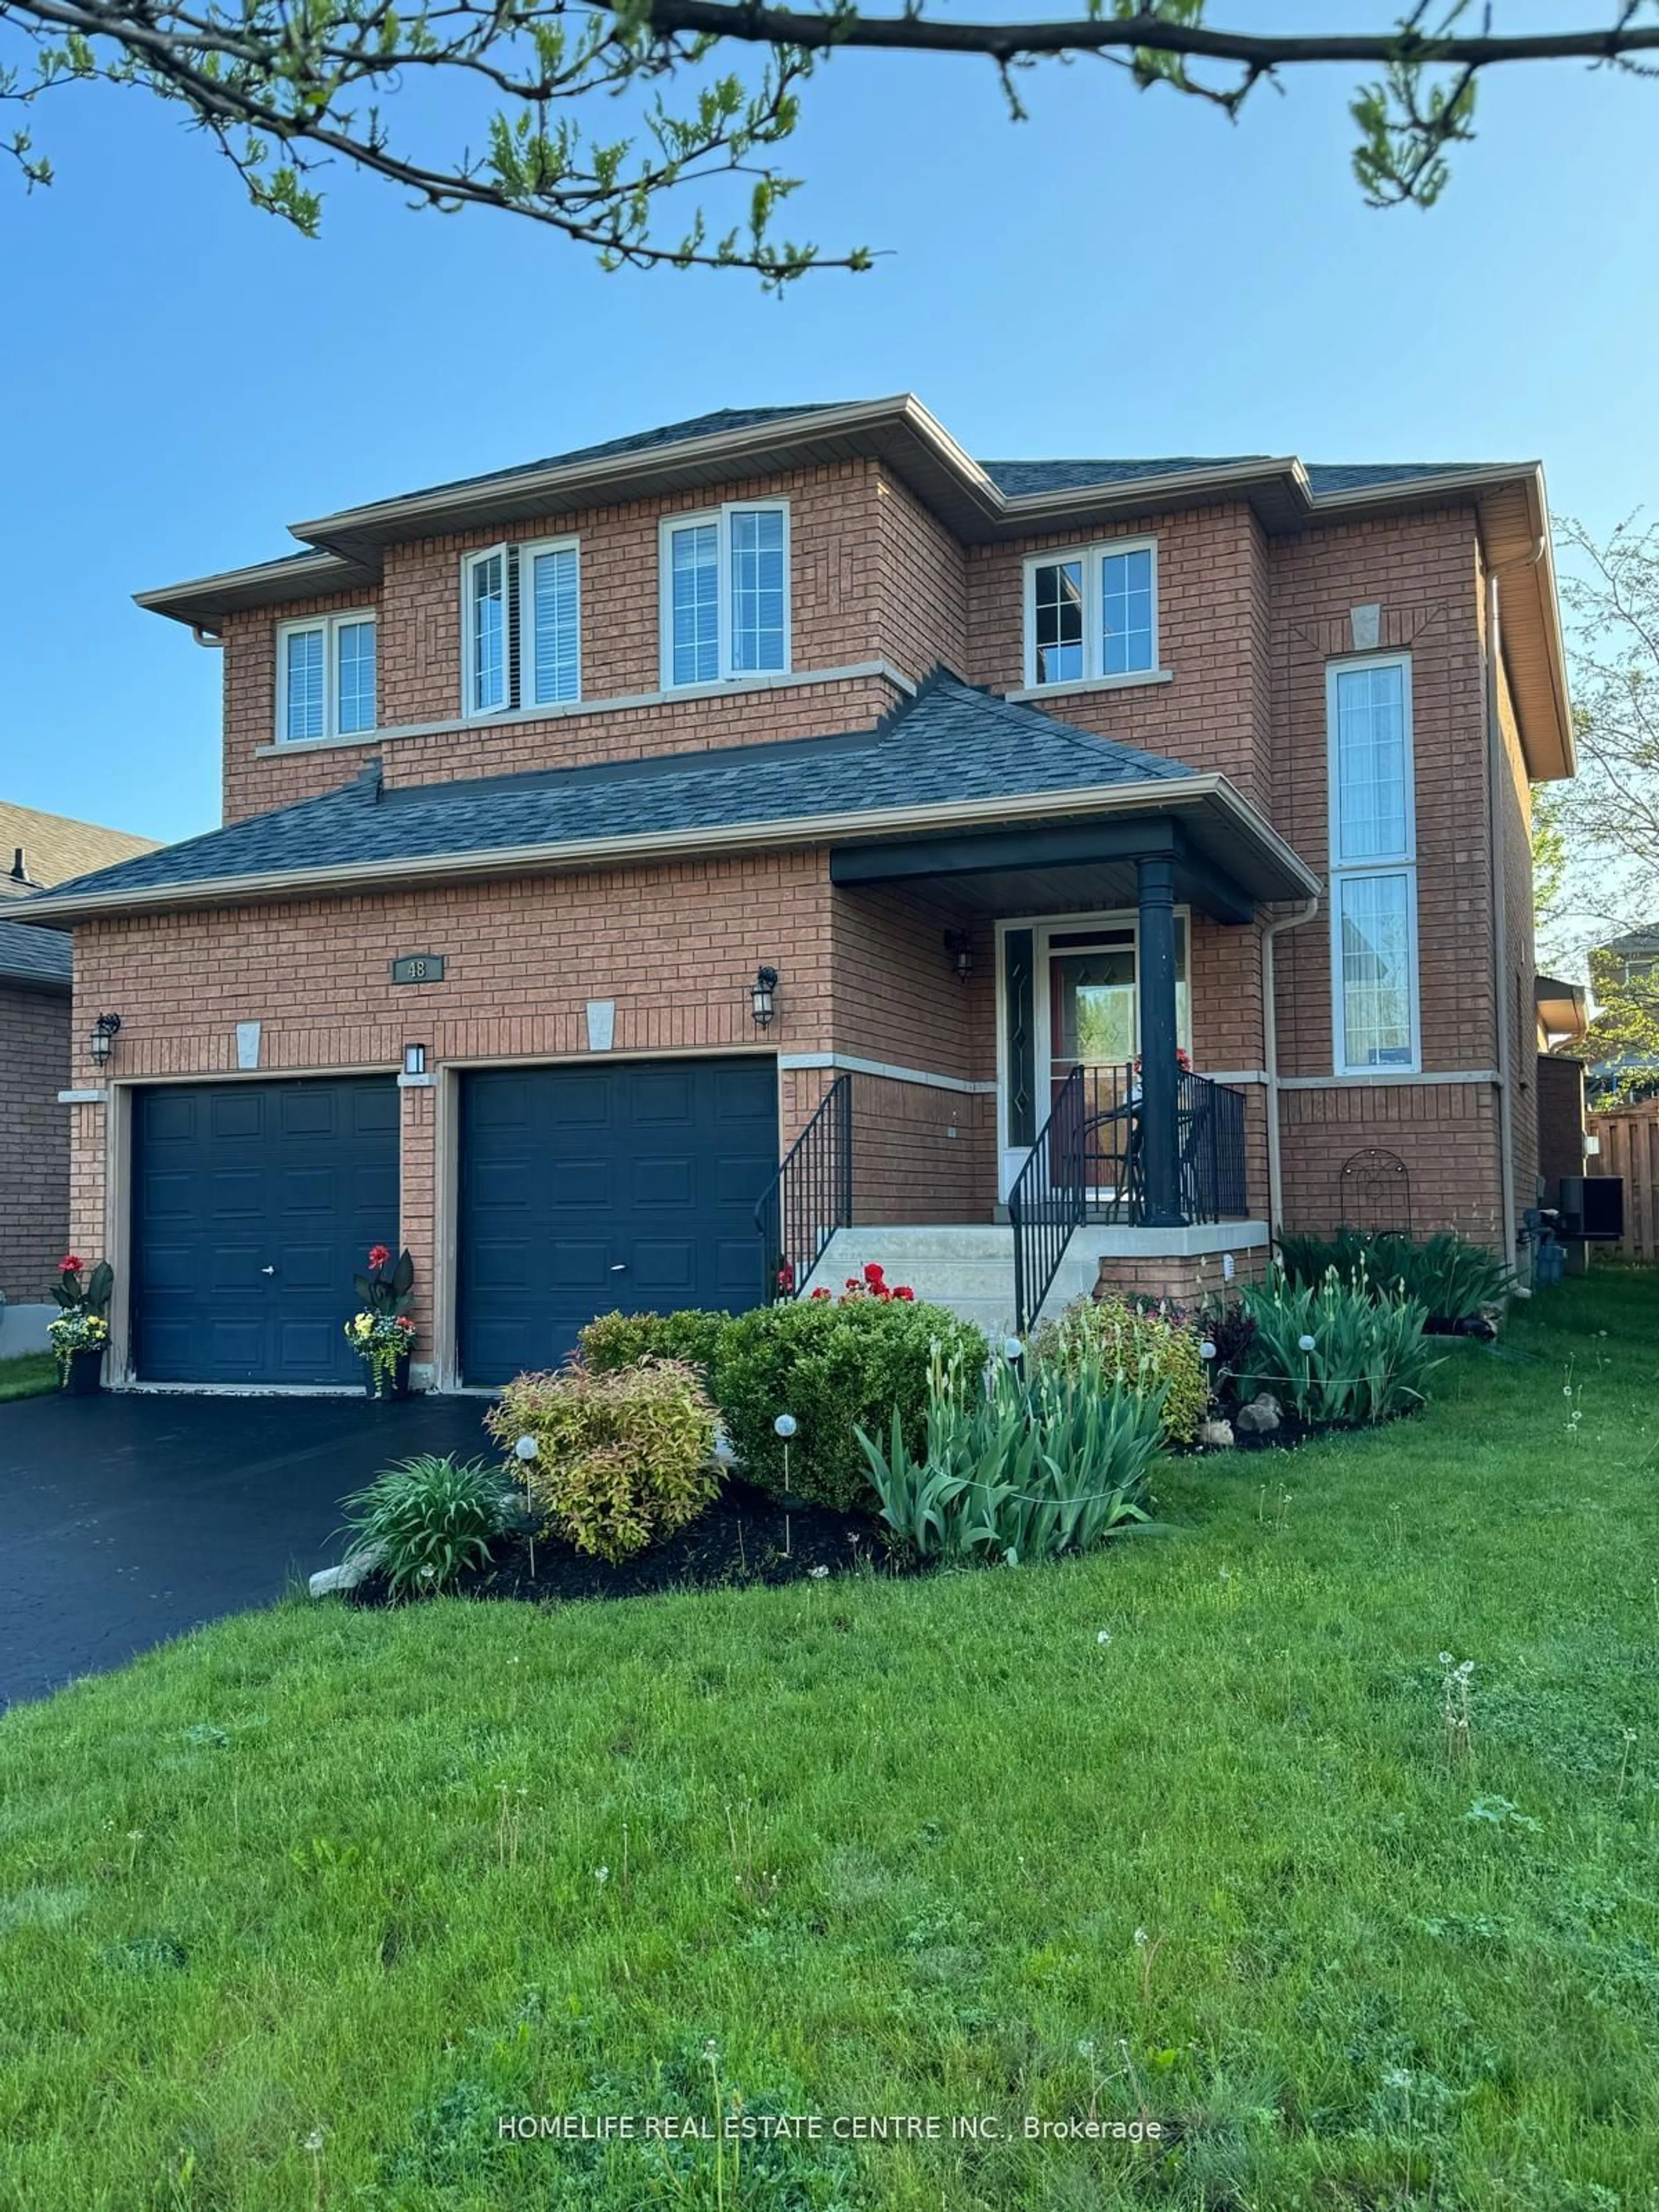 Home with brick exterior material for 48 Prince of Wales Dr, Barrie Ontario L4N 0T1